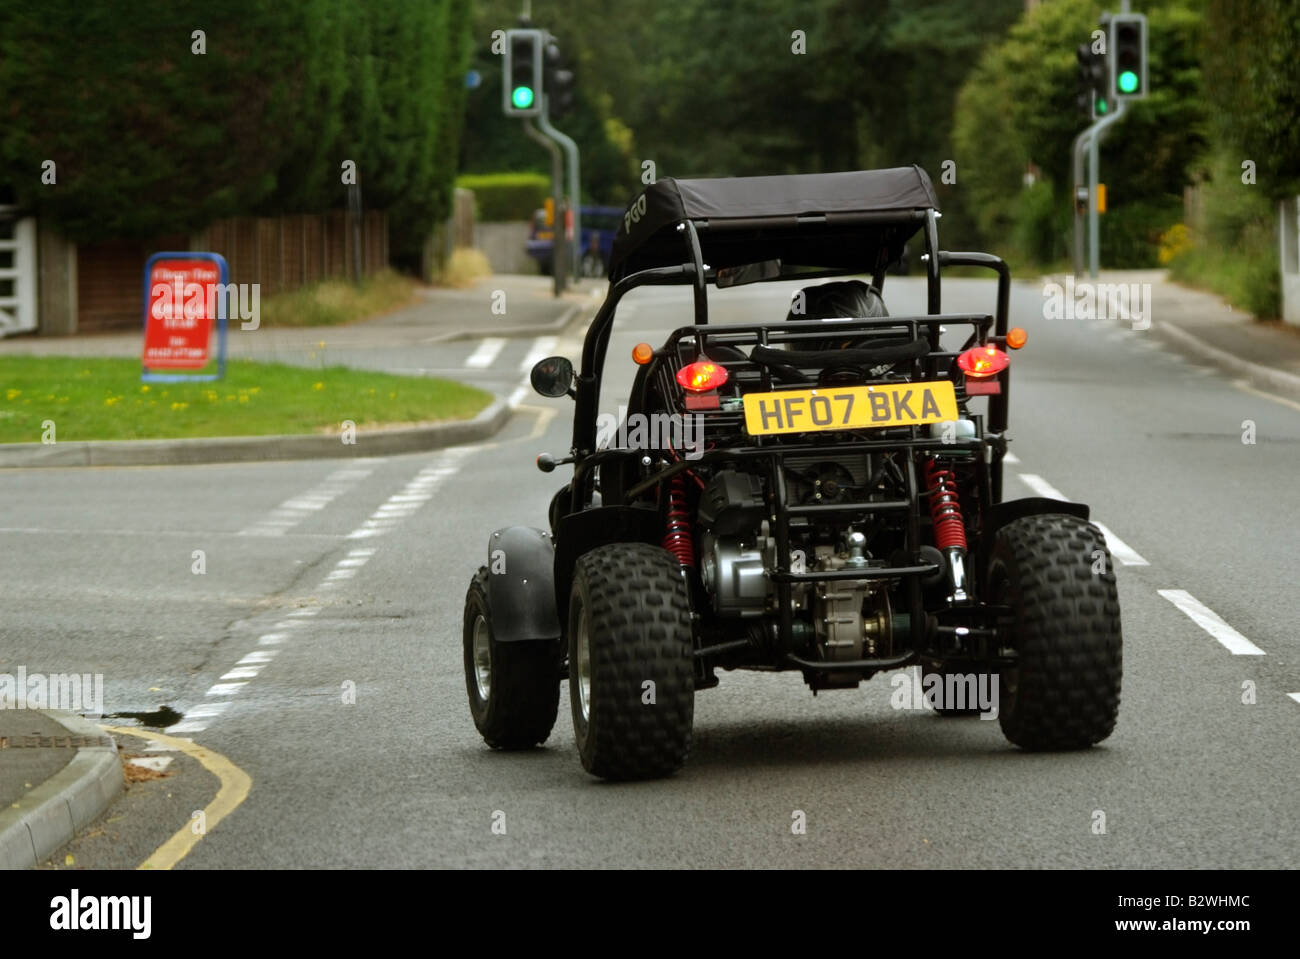 used road legal buggy for sale uk